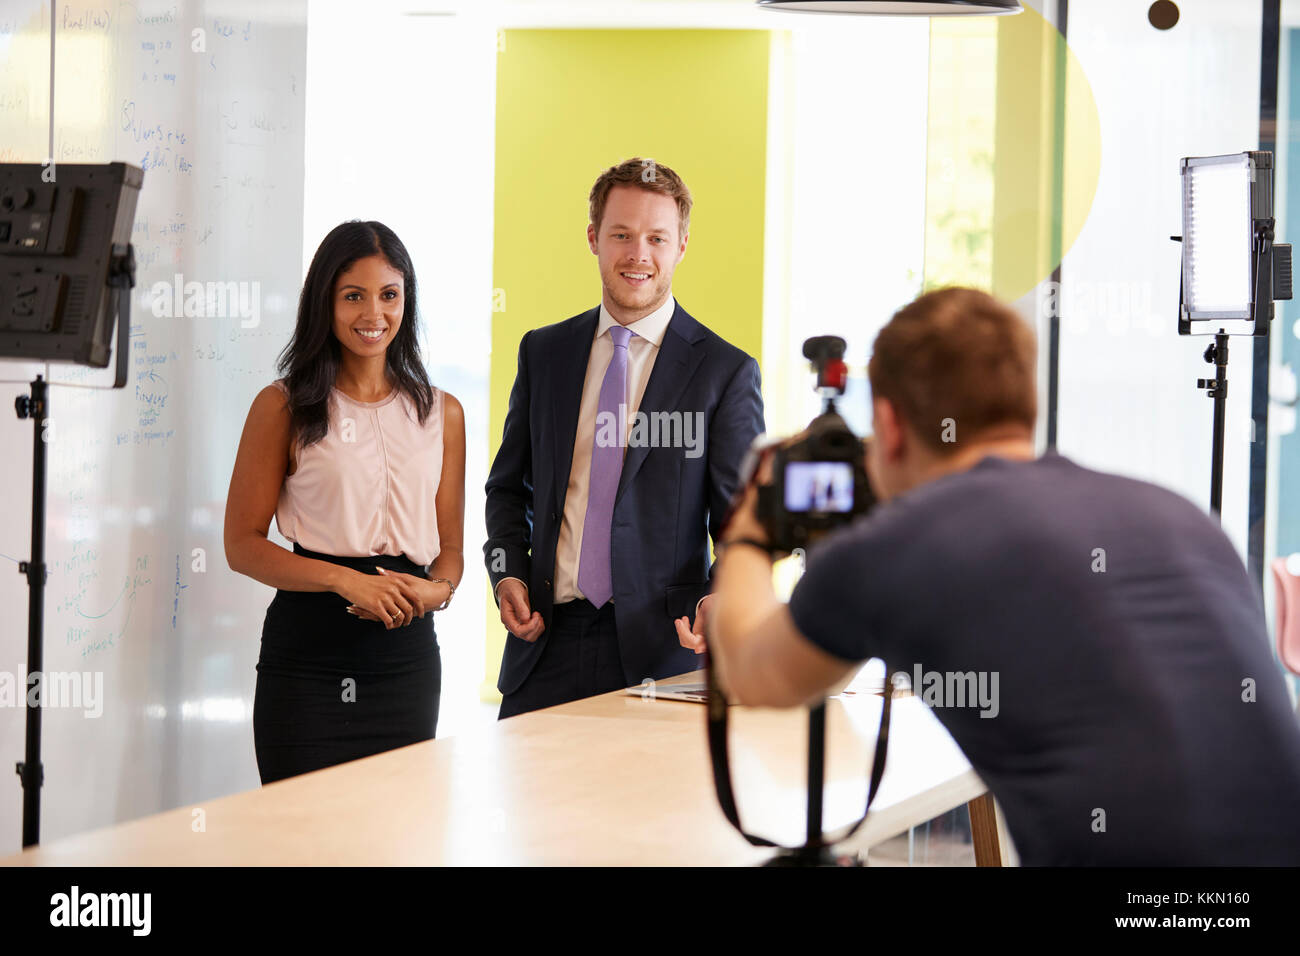 Three people making a corporate demonstration video Stock Photo